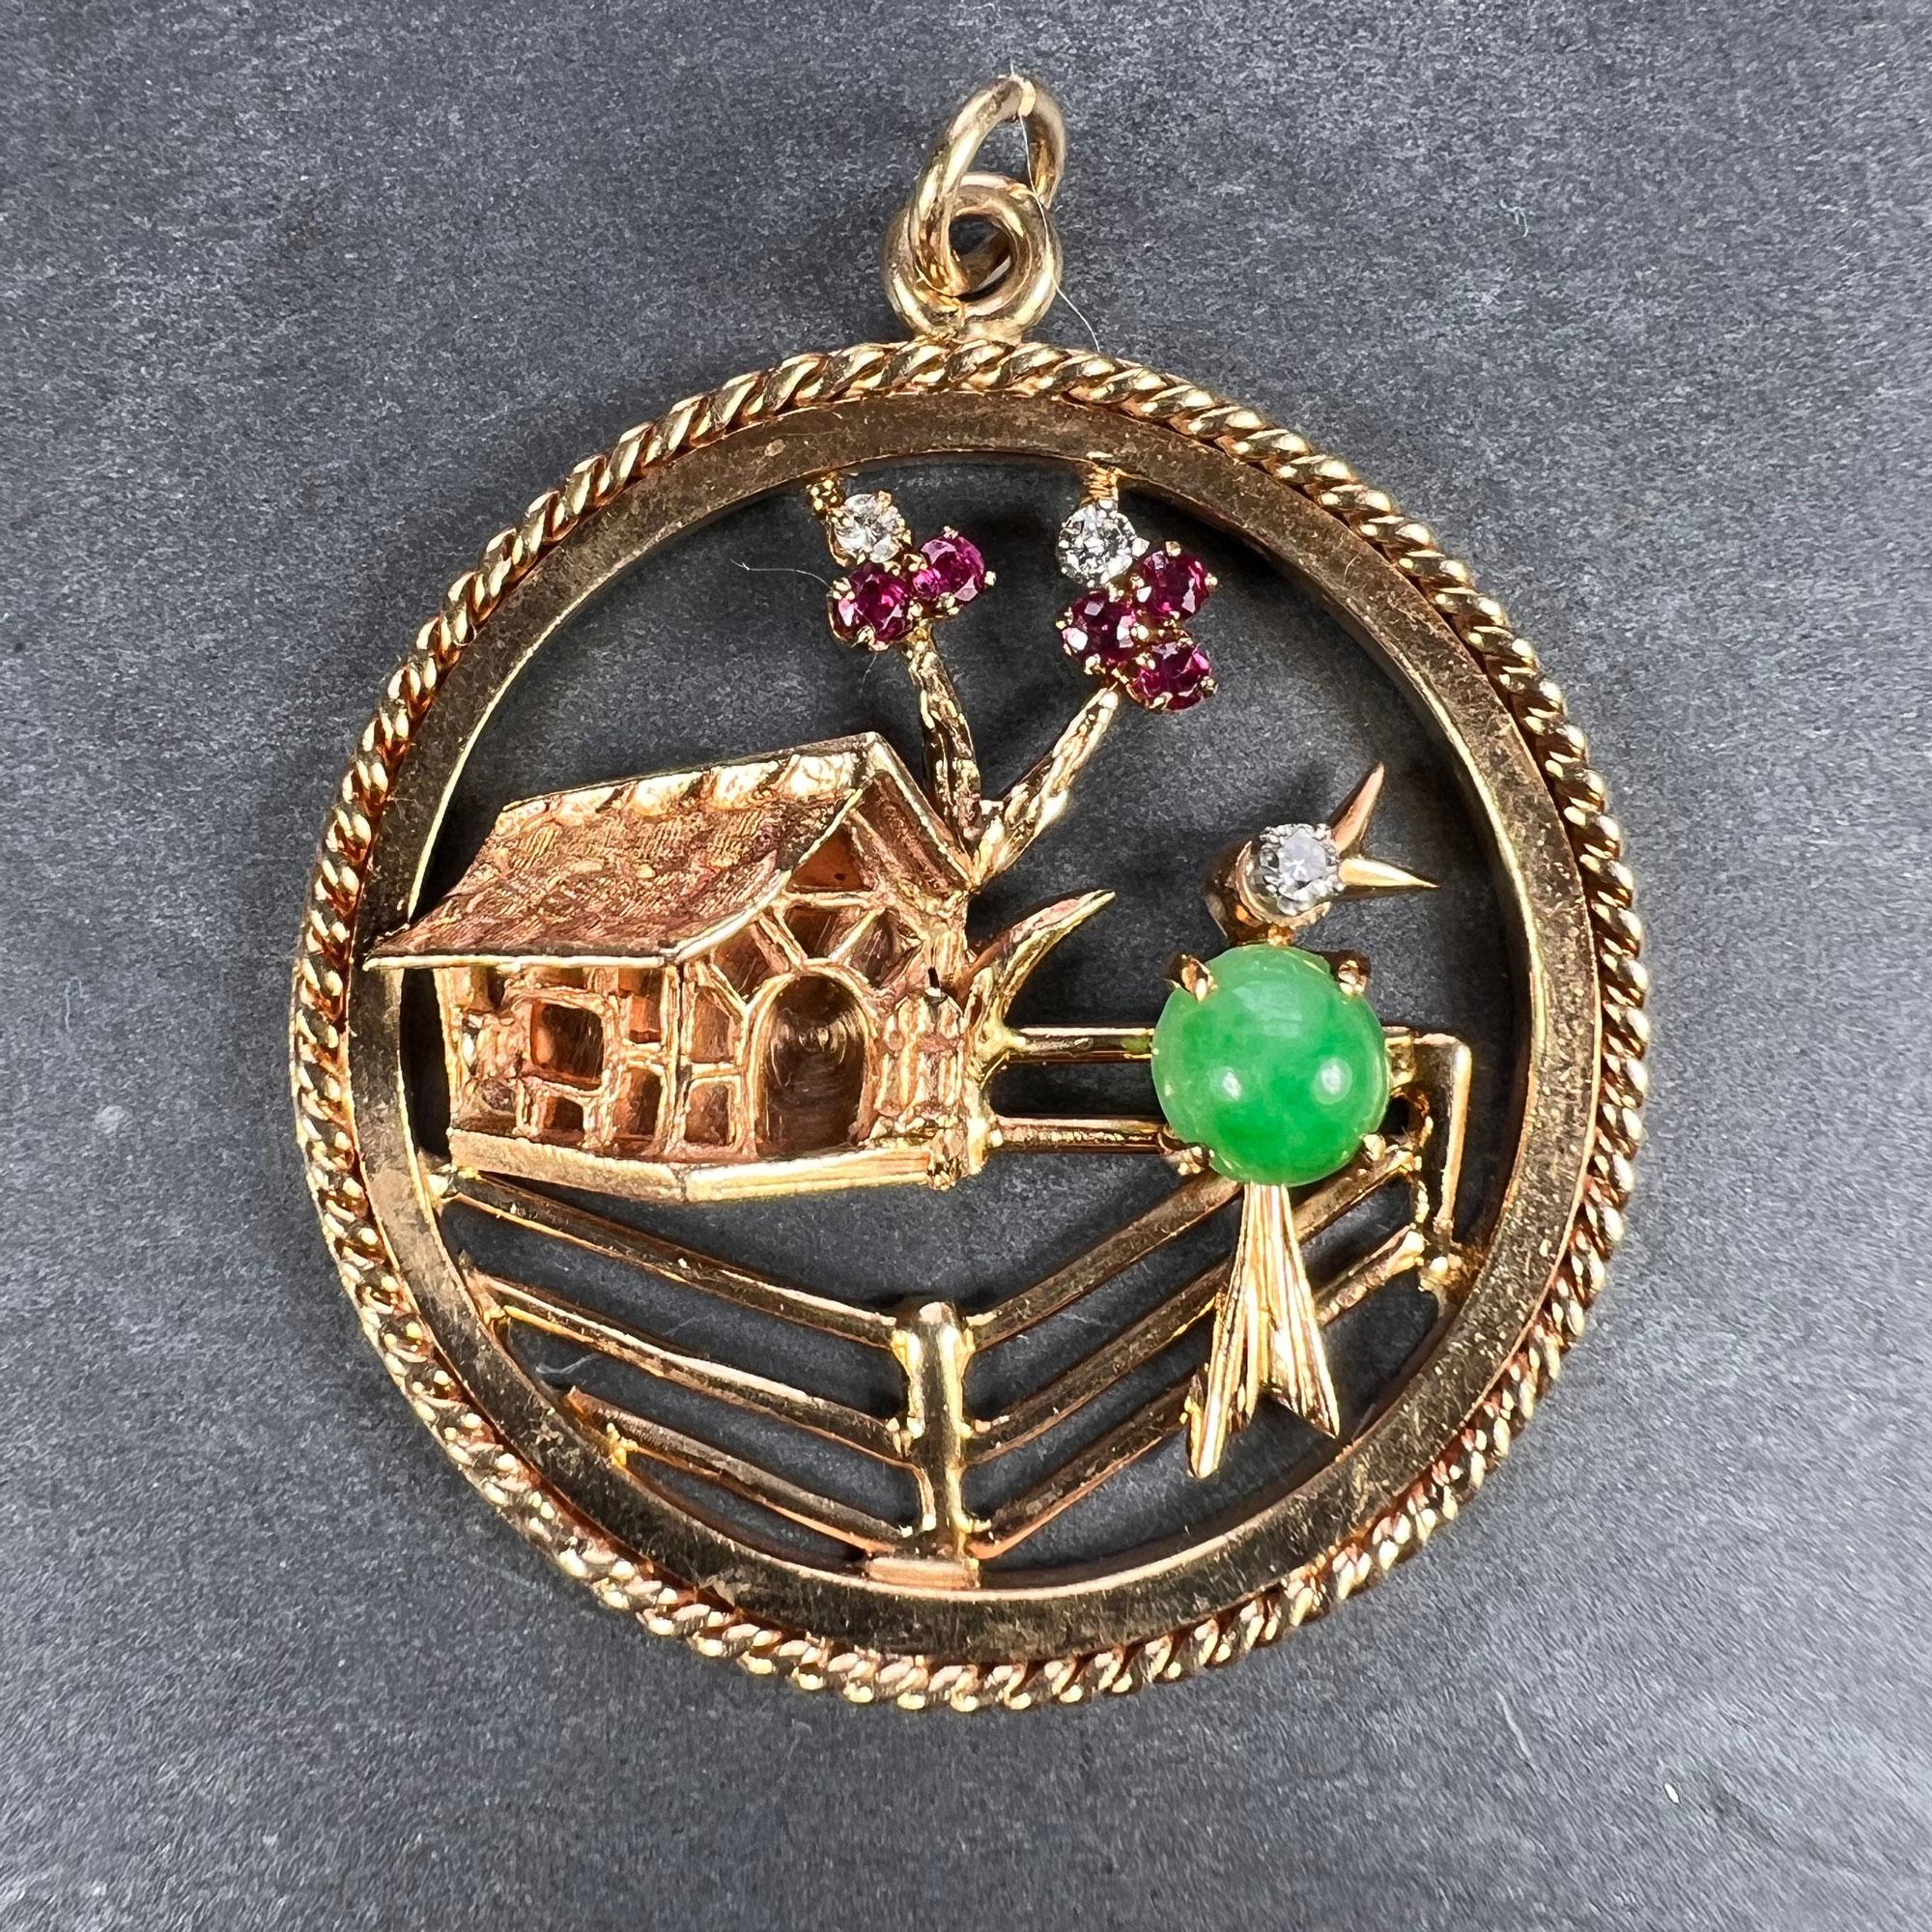 A large 14 karat yellow gold 'Home Sweet Home' charm pendant designed as a house and ruby diamond tree with a jade and diamond bird singing on a fence. Marked 14K for 14 karat gold and American manufacture.

Gem content:
Jadeite Jade cabochon